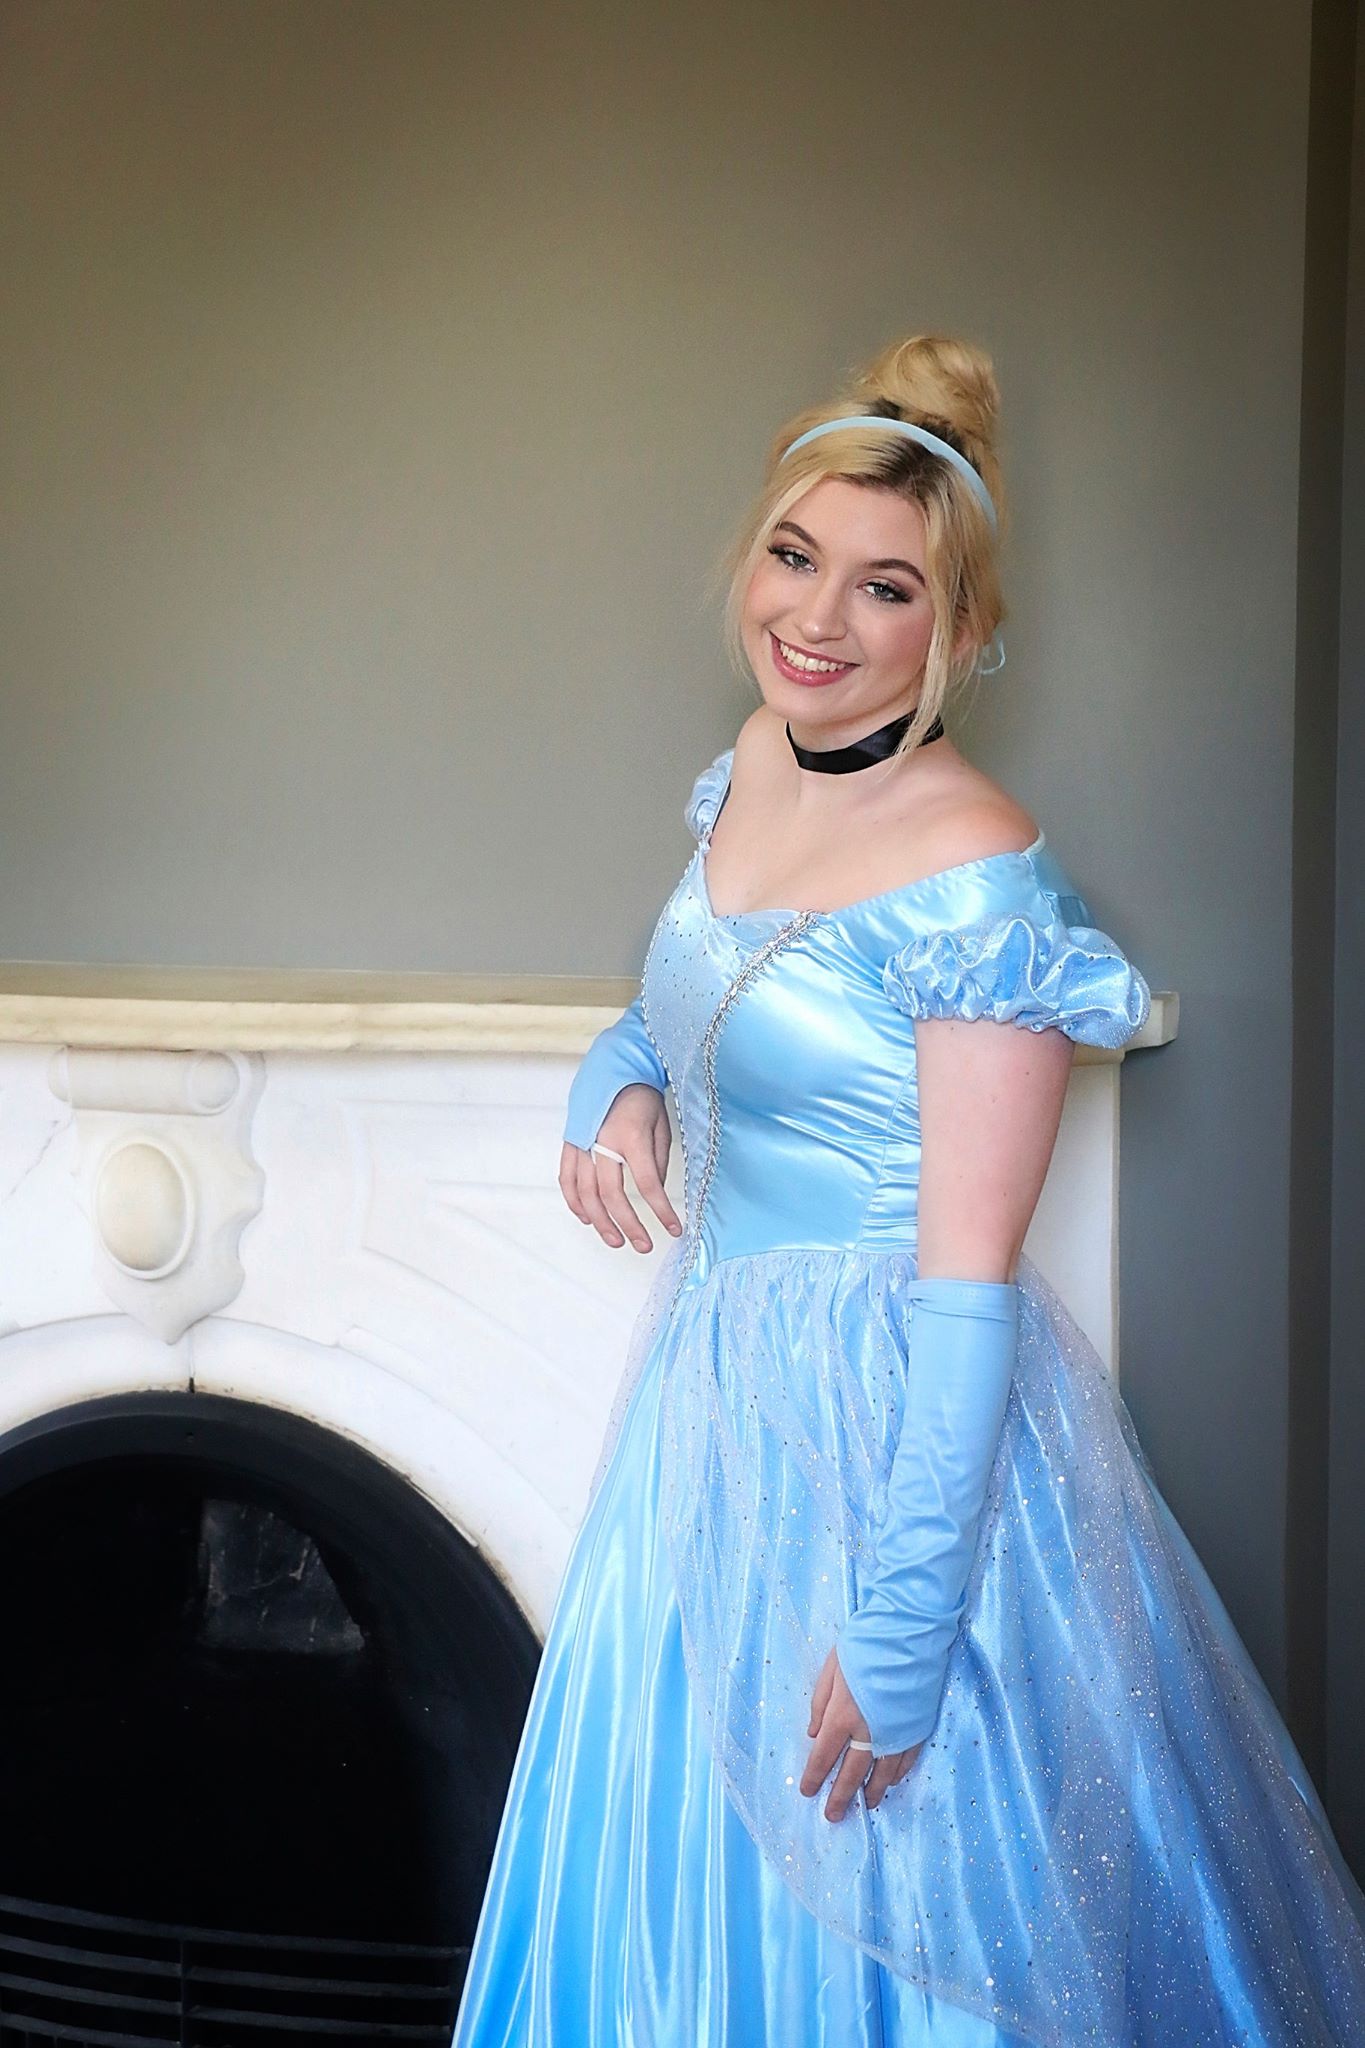 Cinderella by the fireplace